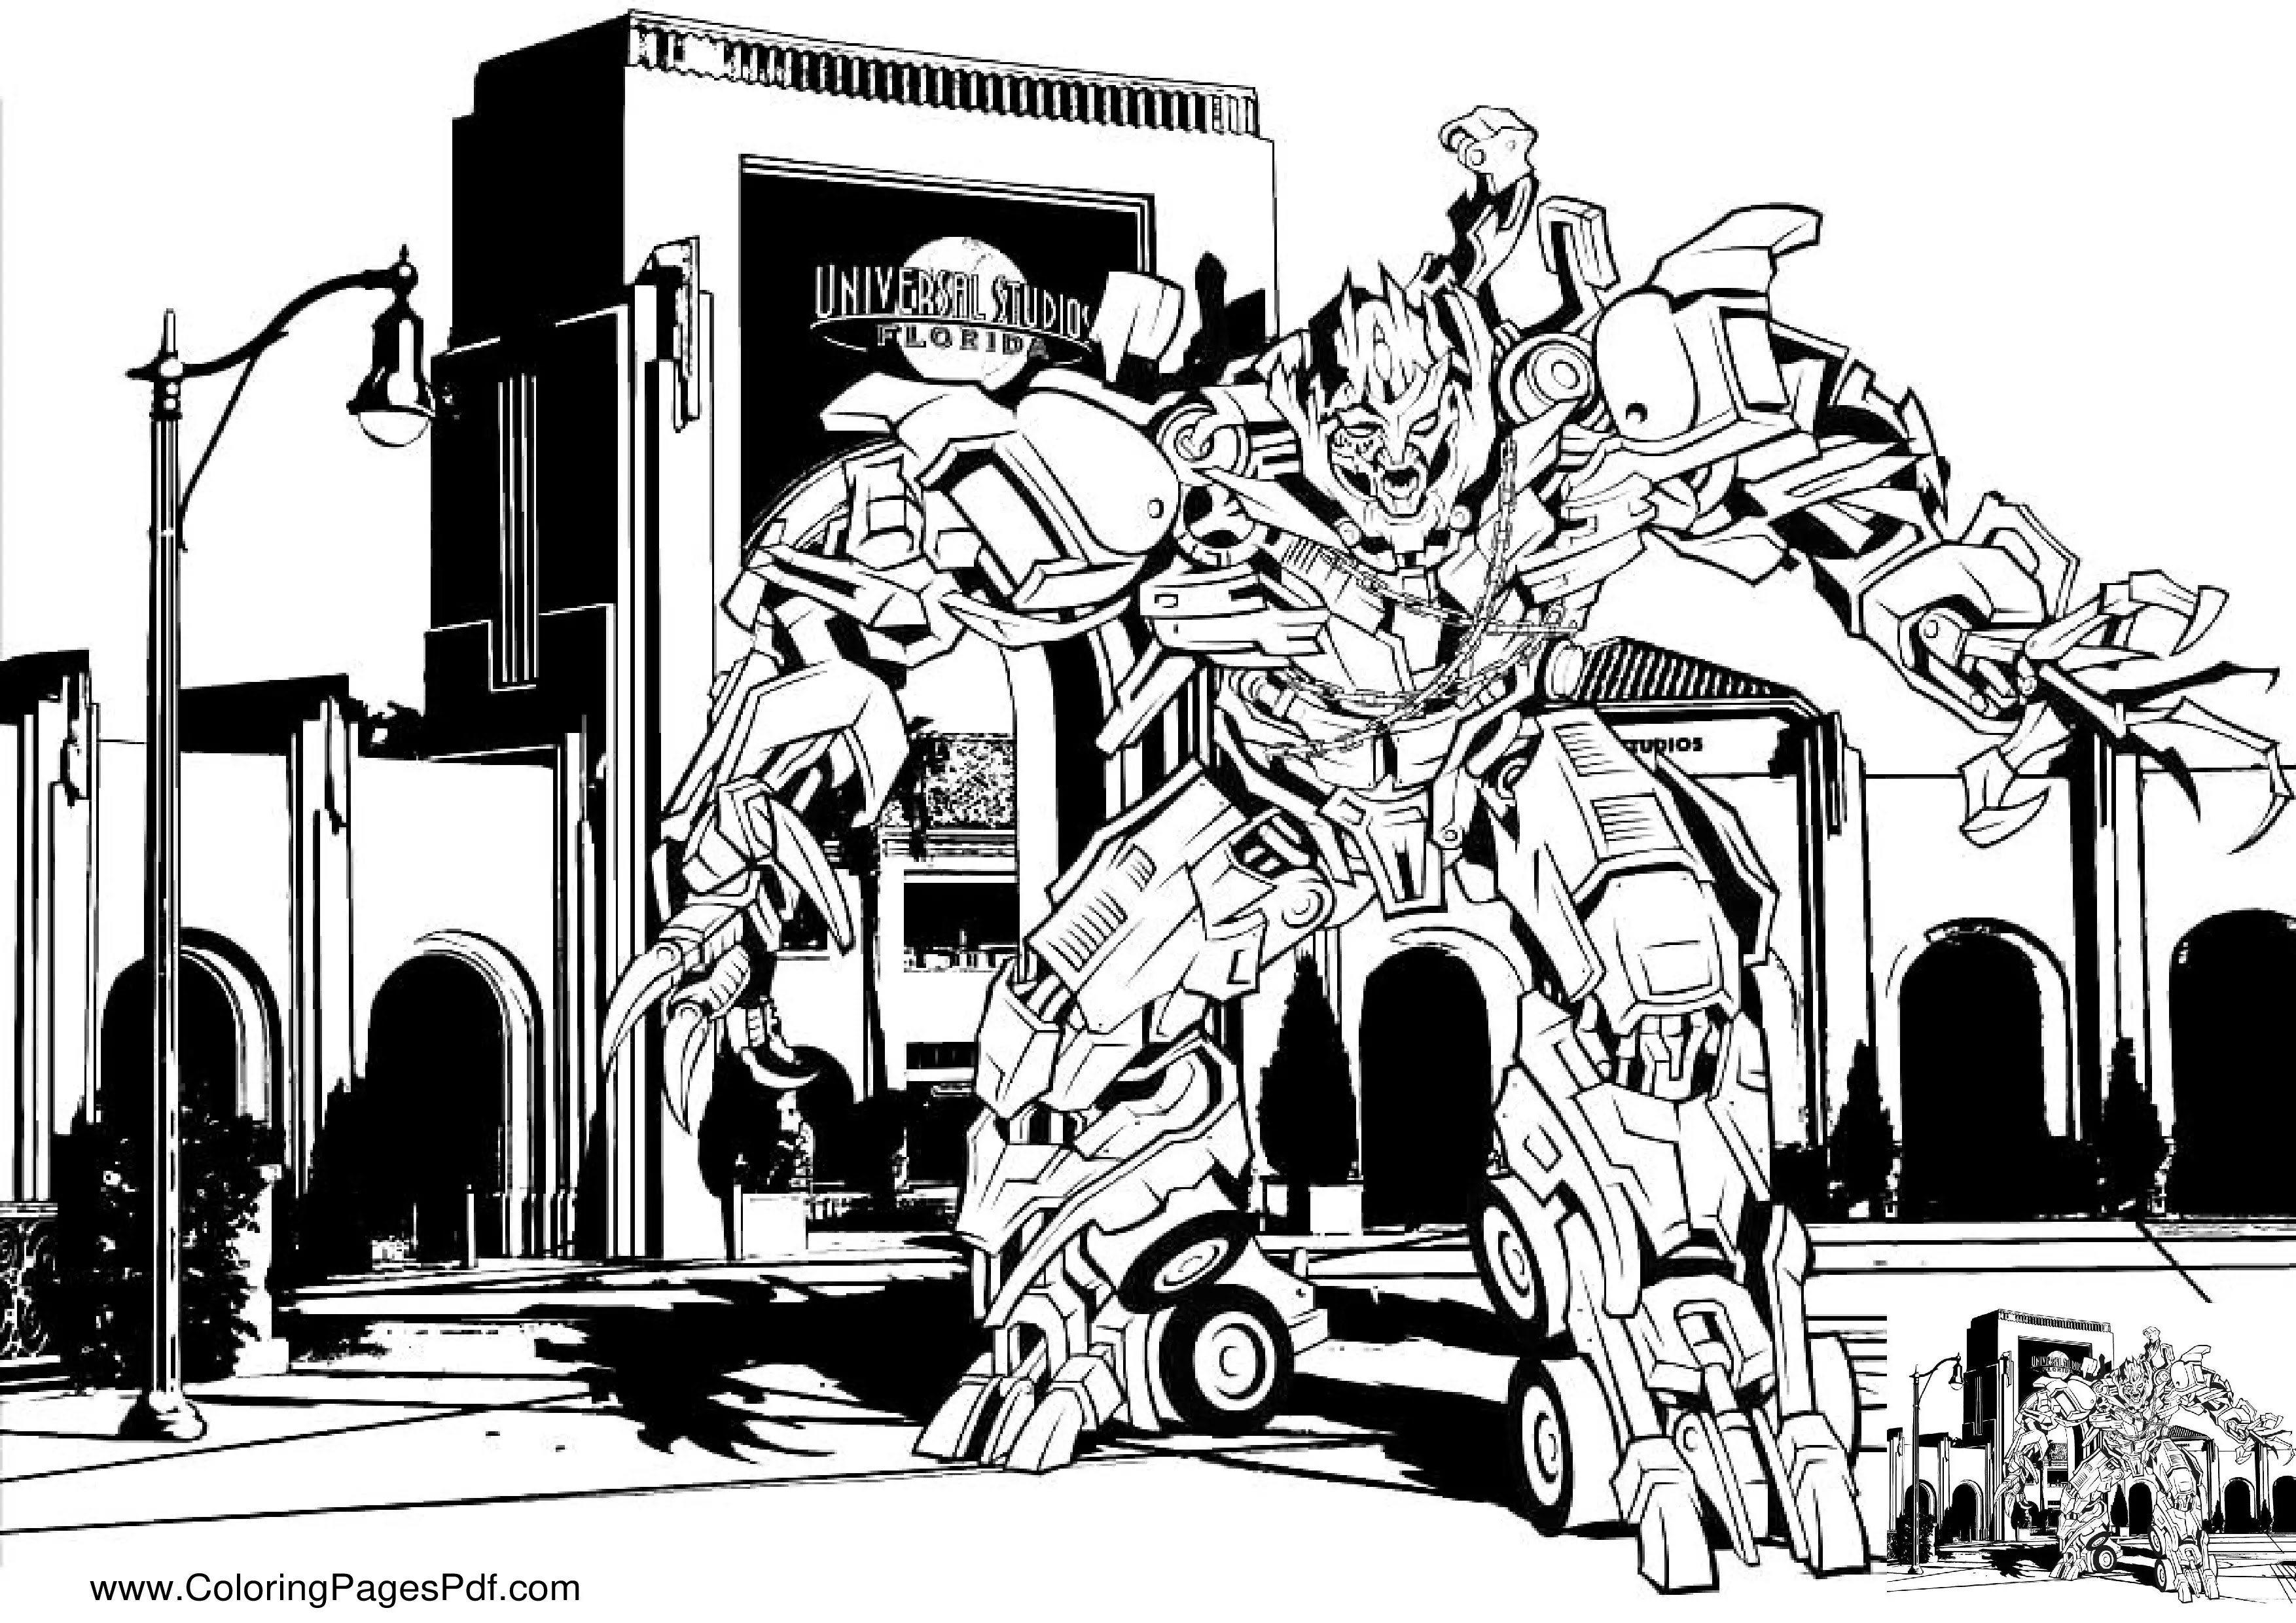 Transformers 5 coloring pages